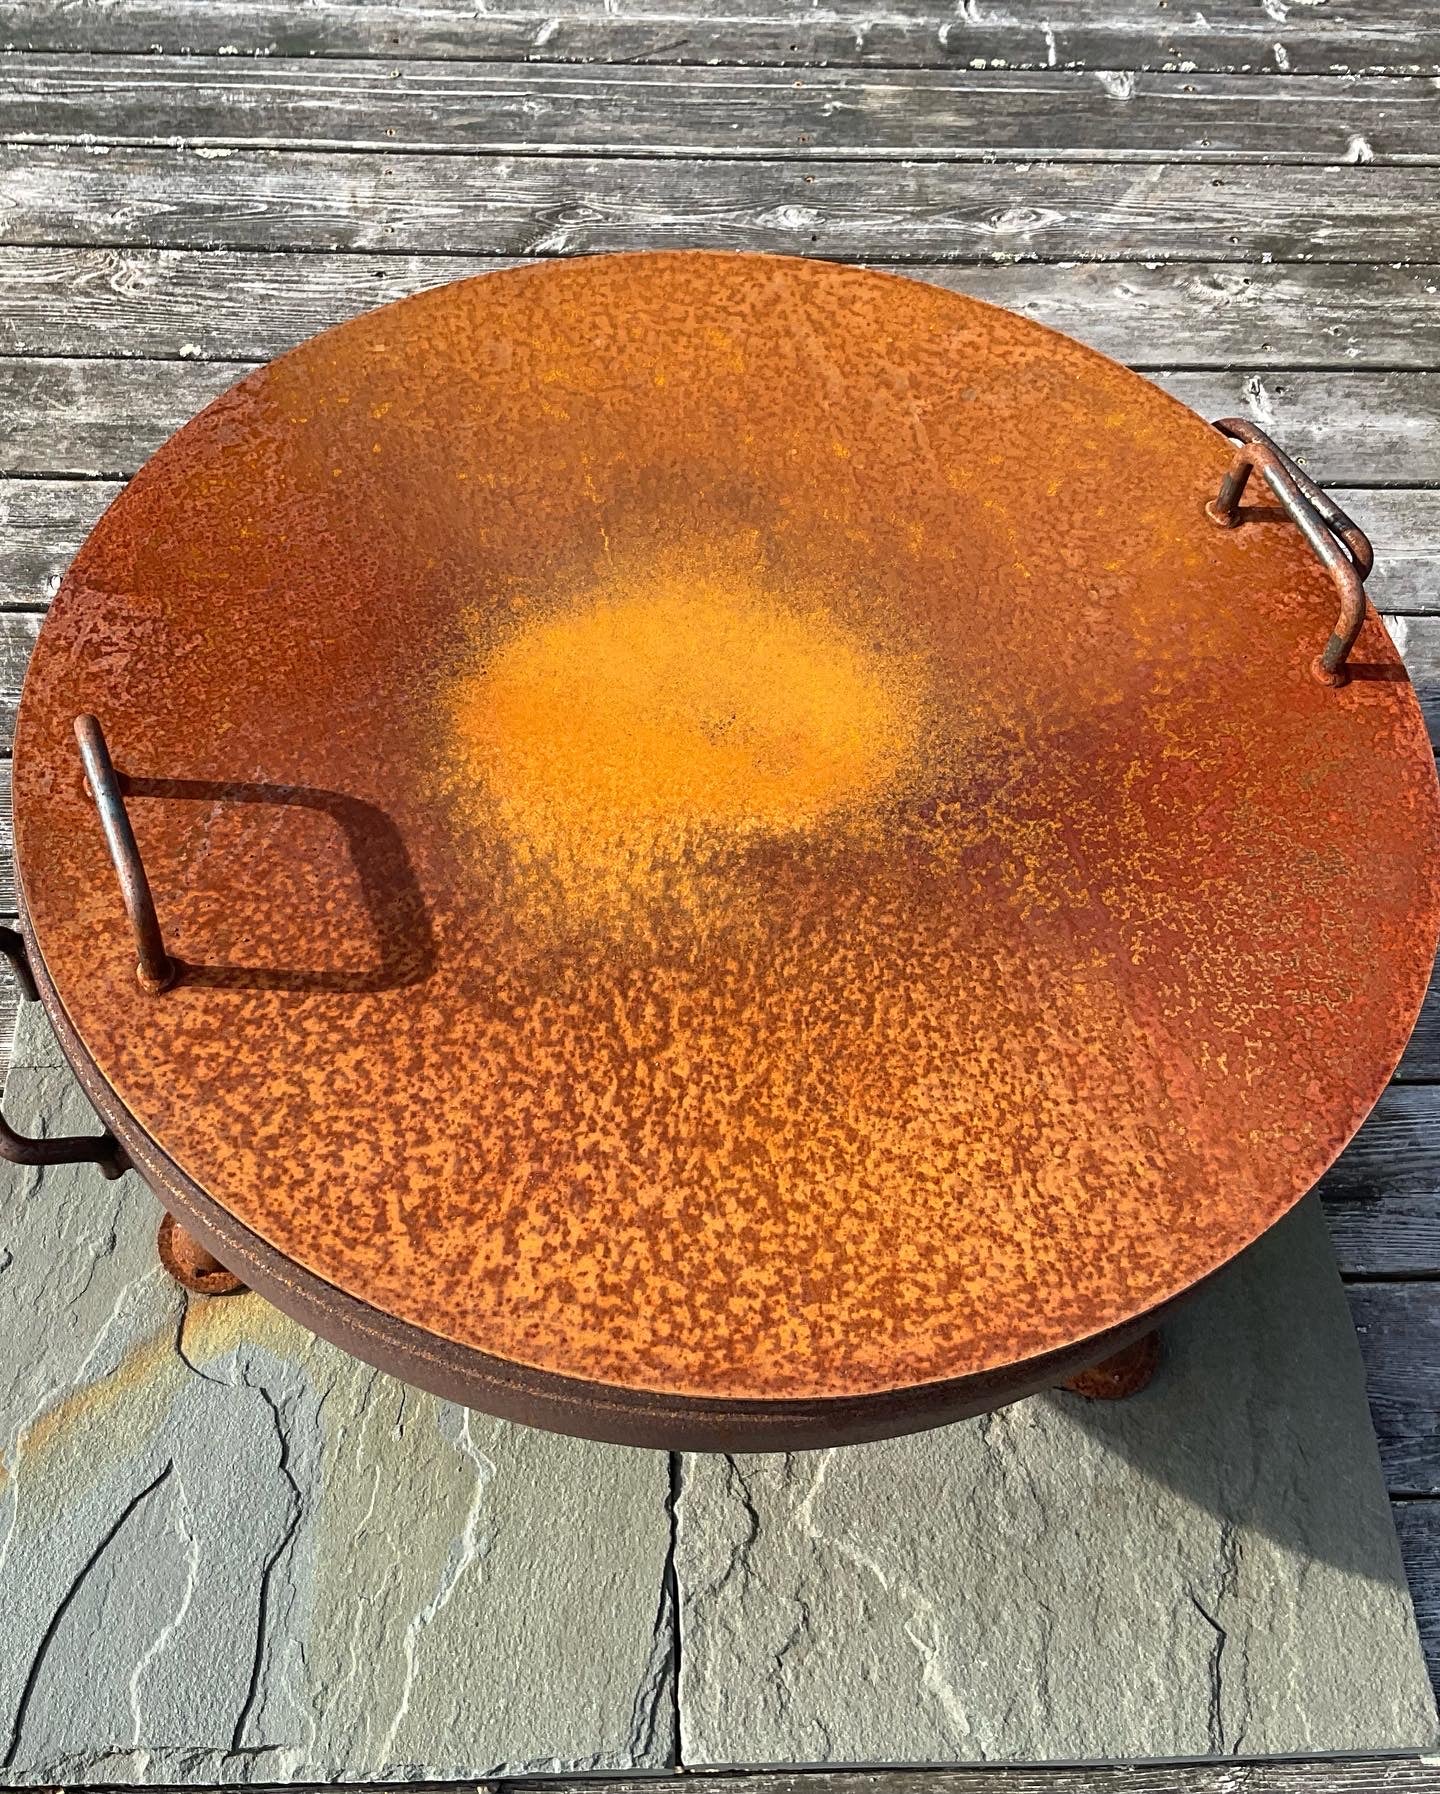 Ambiguity Series #17 (Reflection: Corroded Fire Pit) 1/20